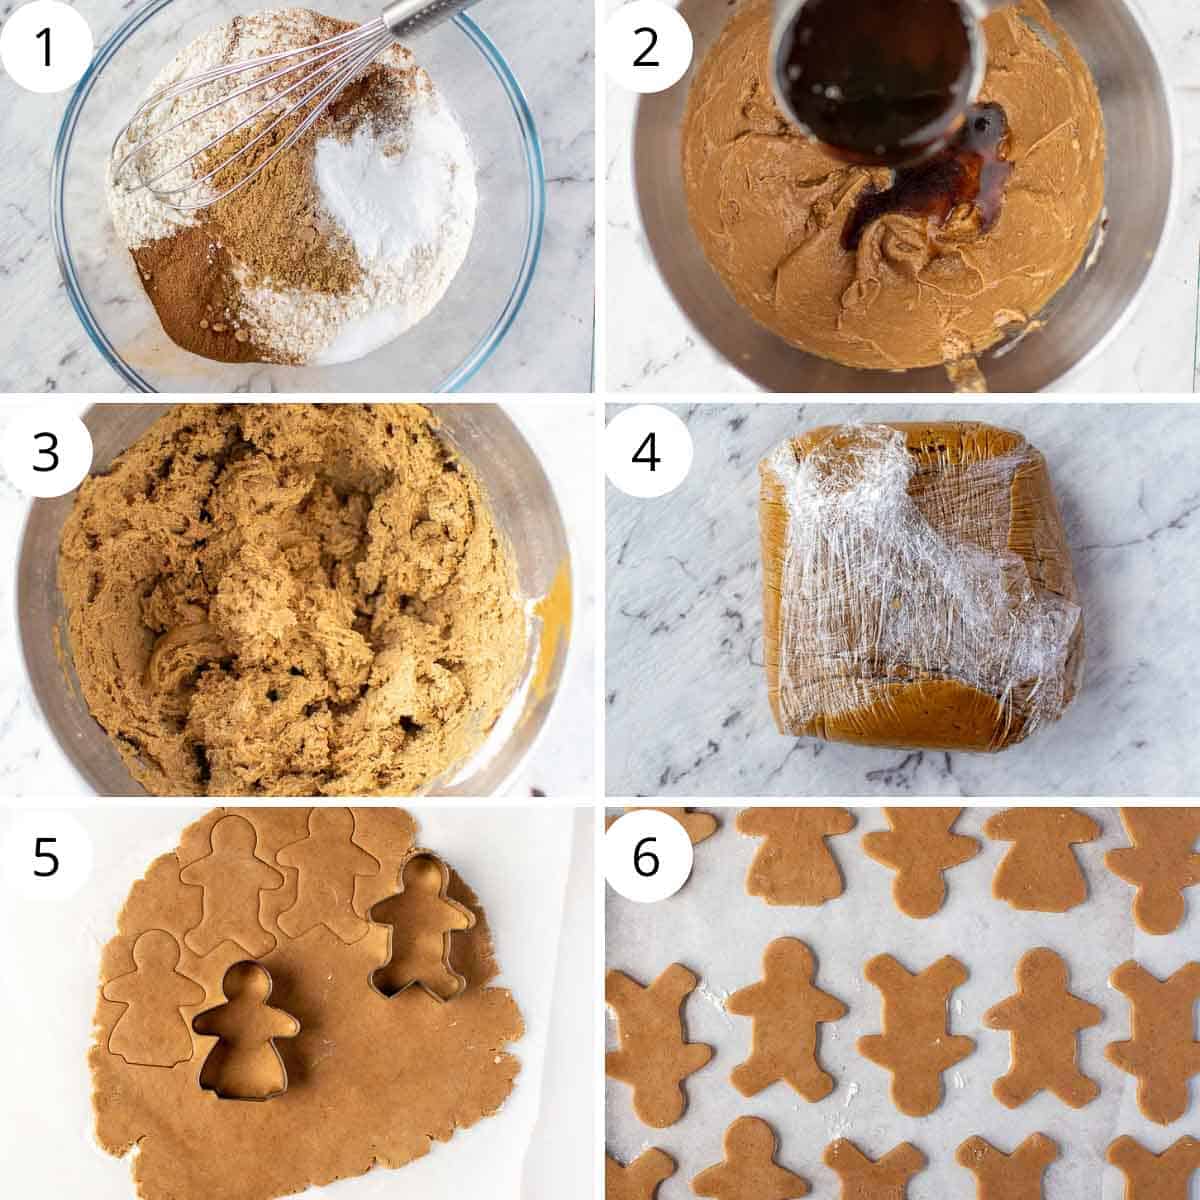 Six step process showing how to make this recipe.